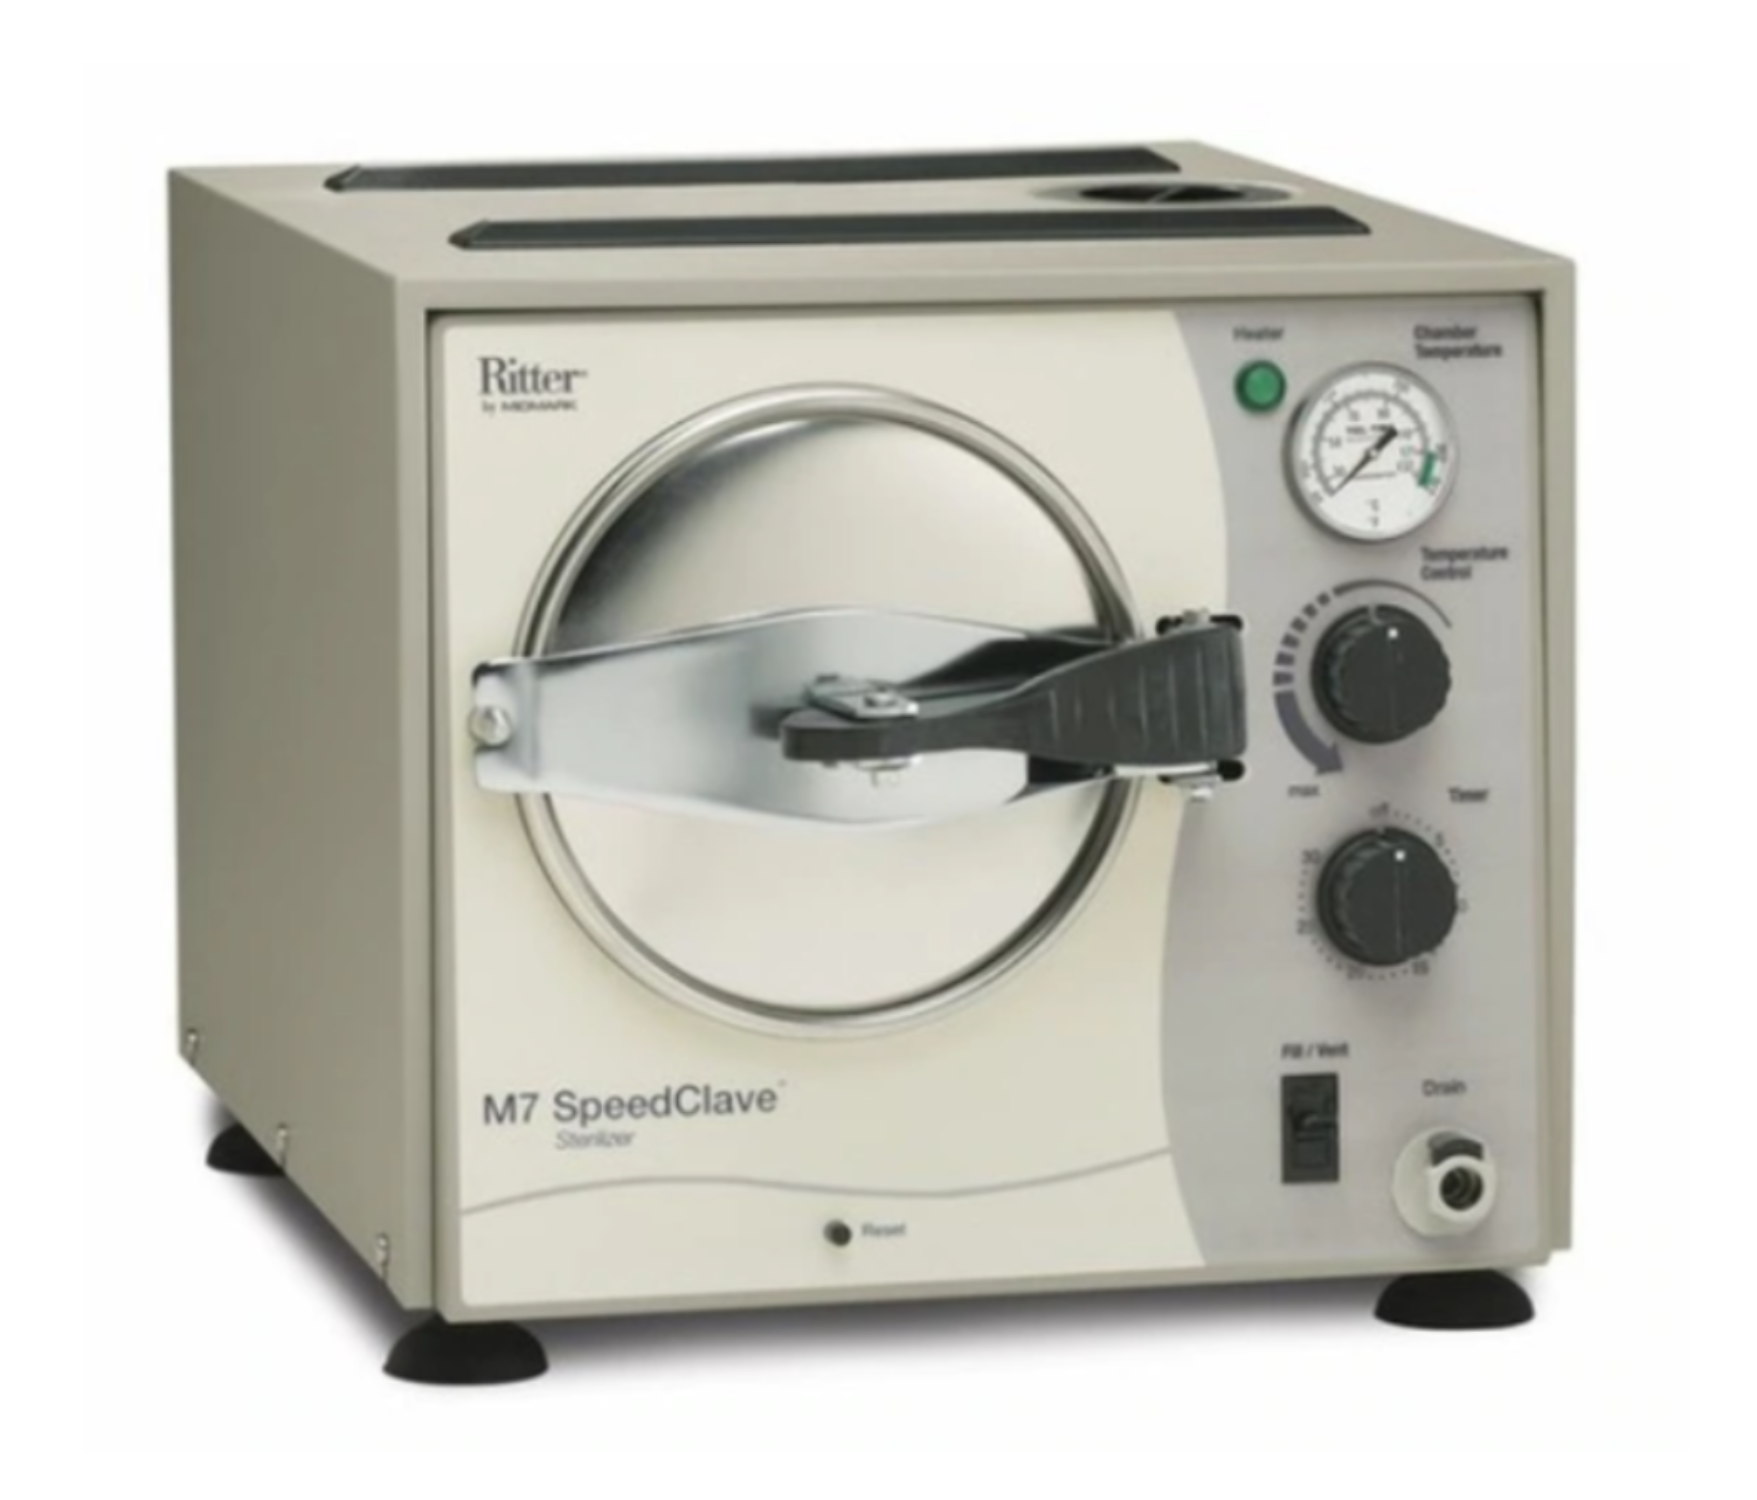 Preowned Midmark M7 Autoclave